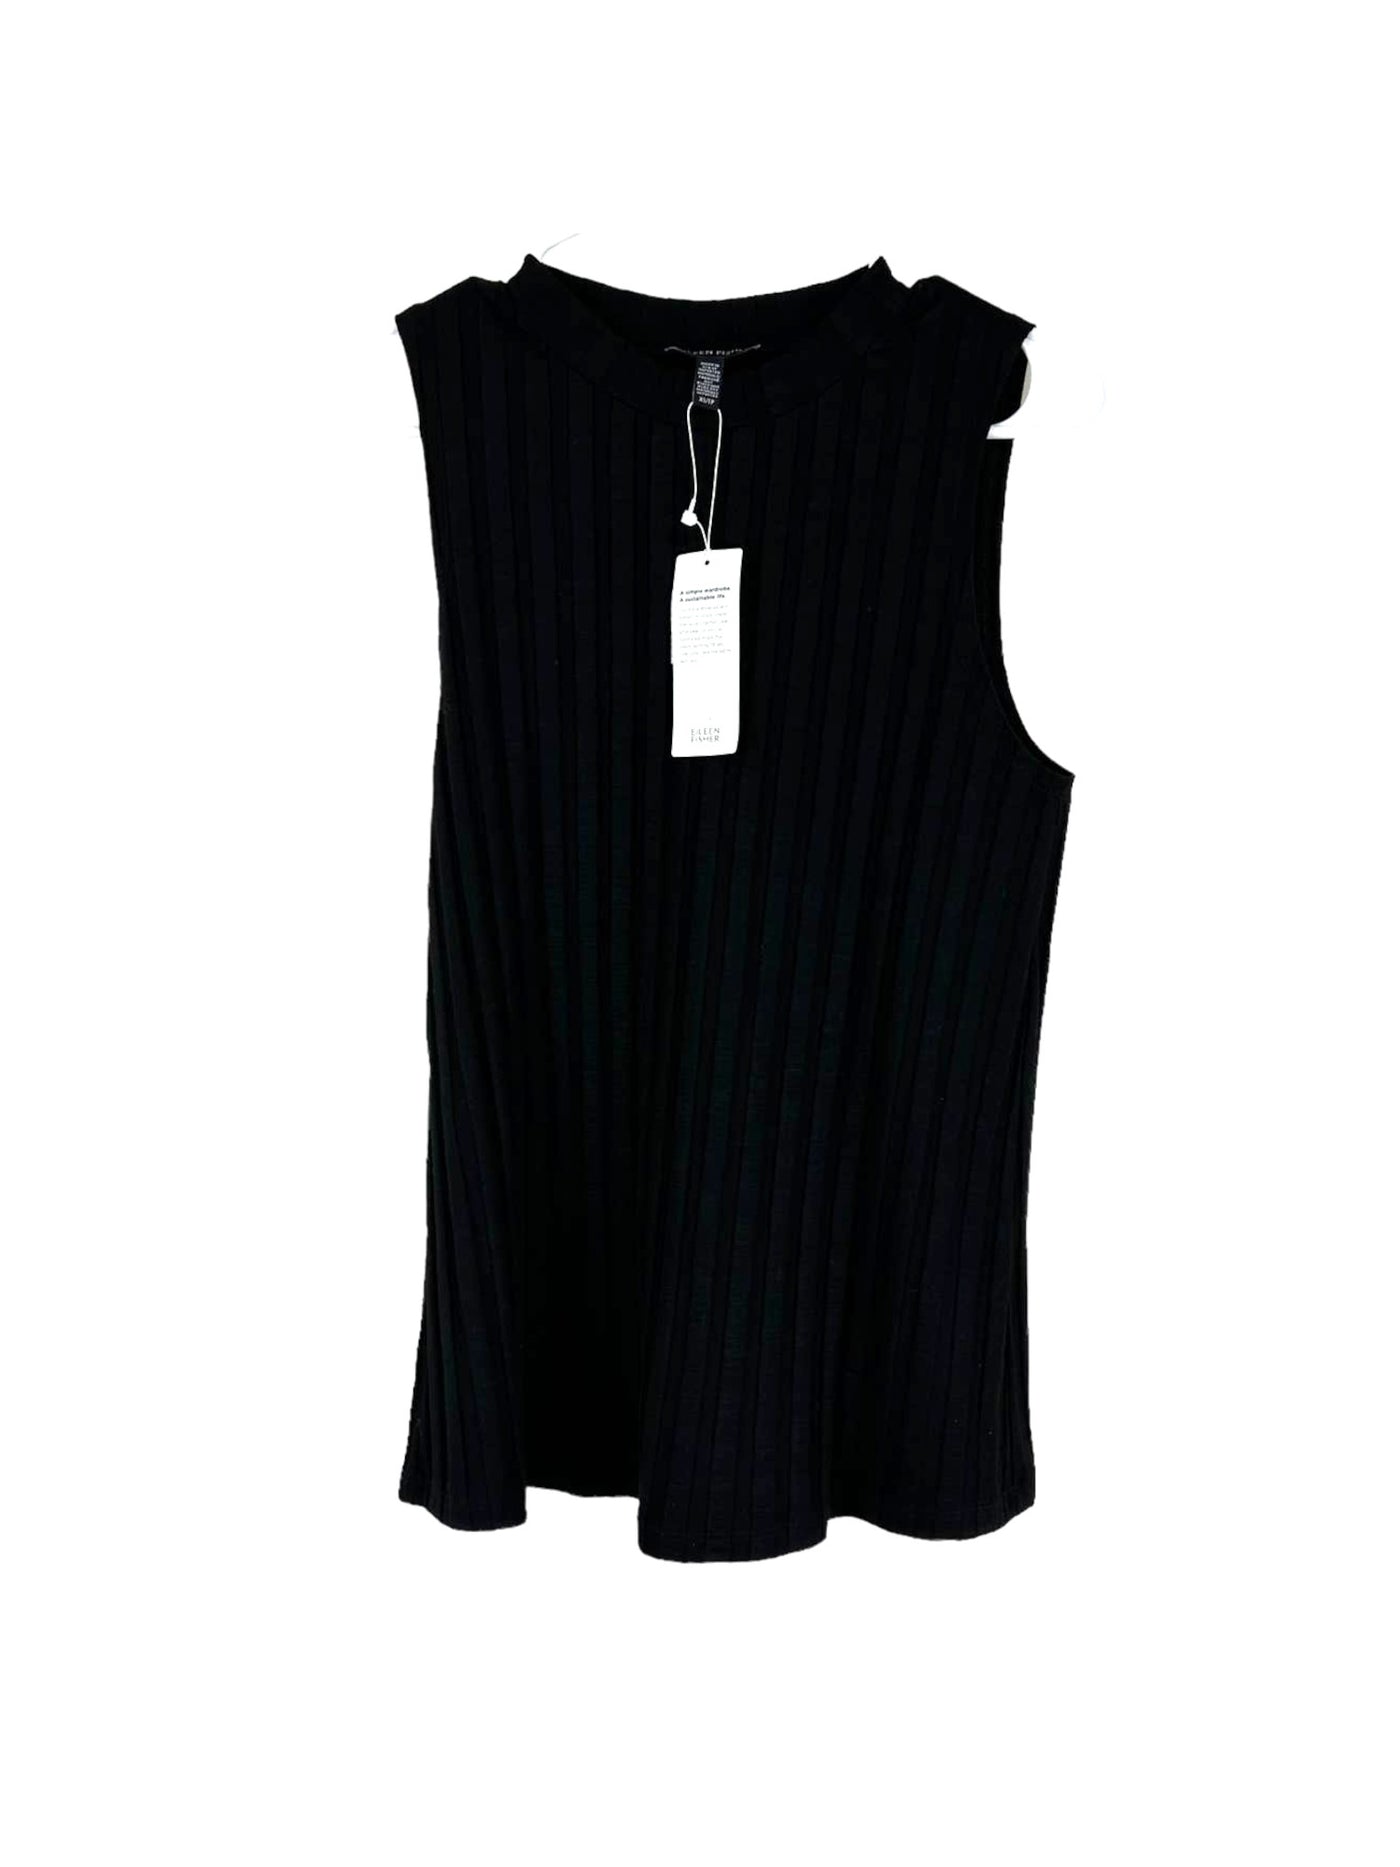 EILEEN FISHER Womens Black Unlined Striped Sleeveless Mock Neck Top Petites PS \ PP